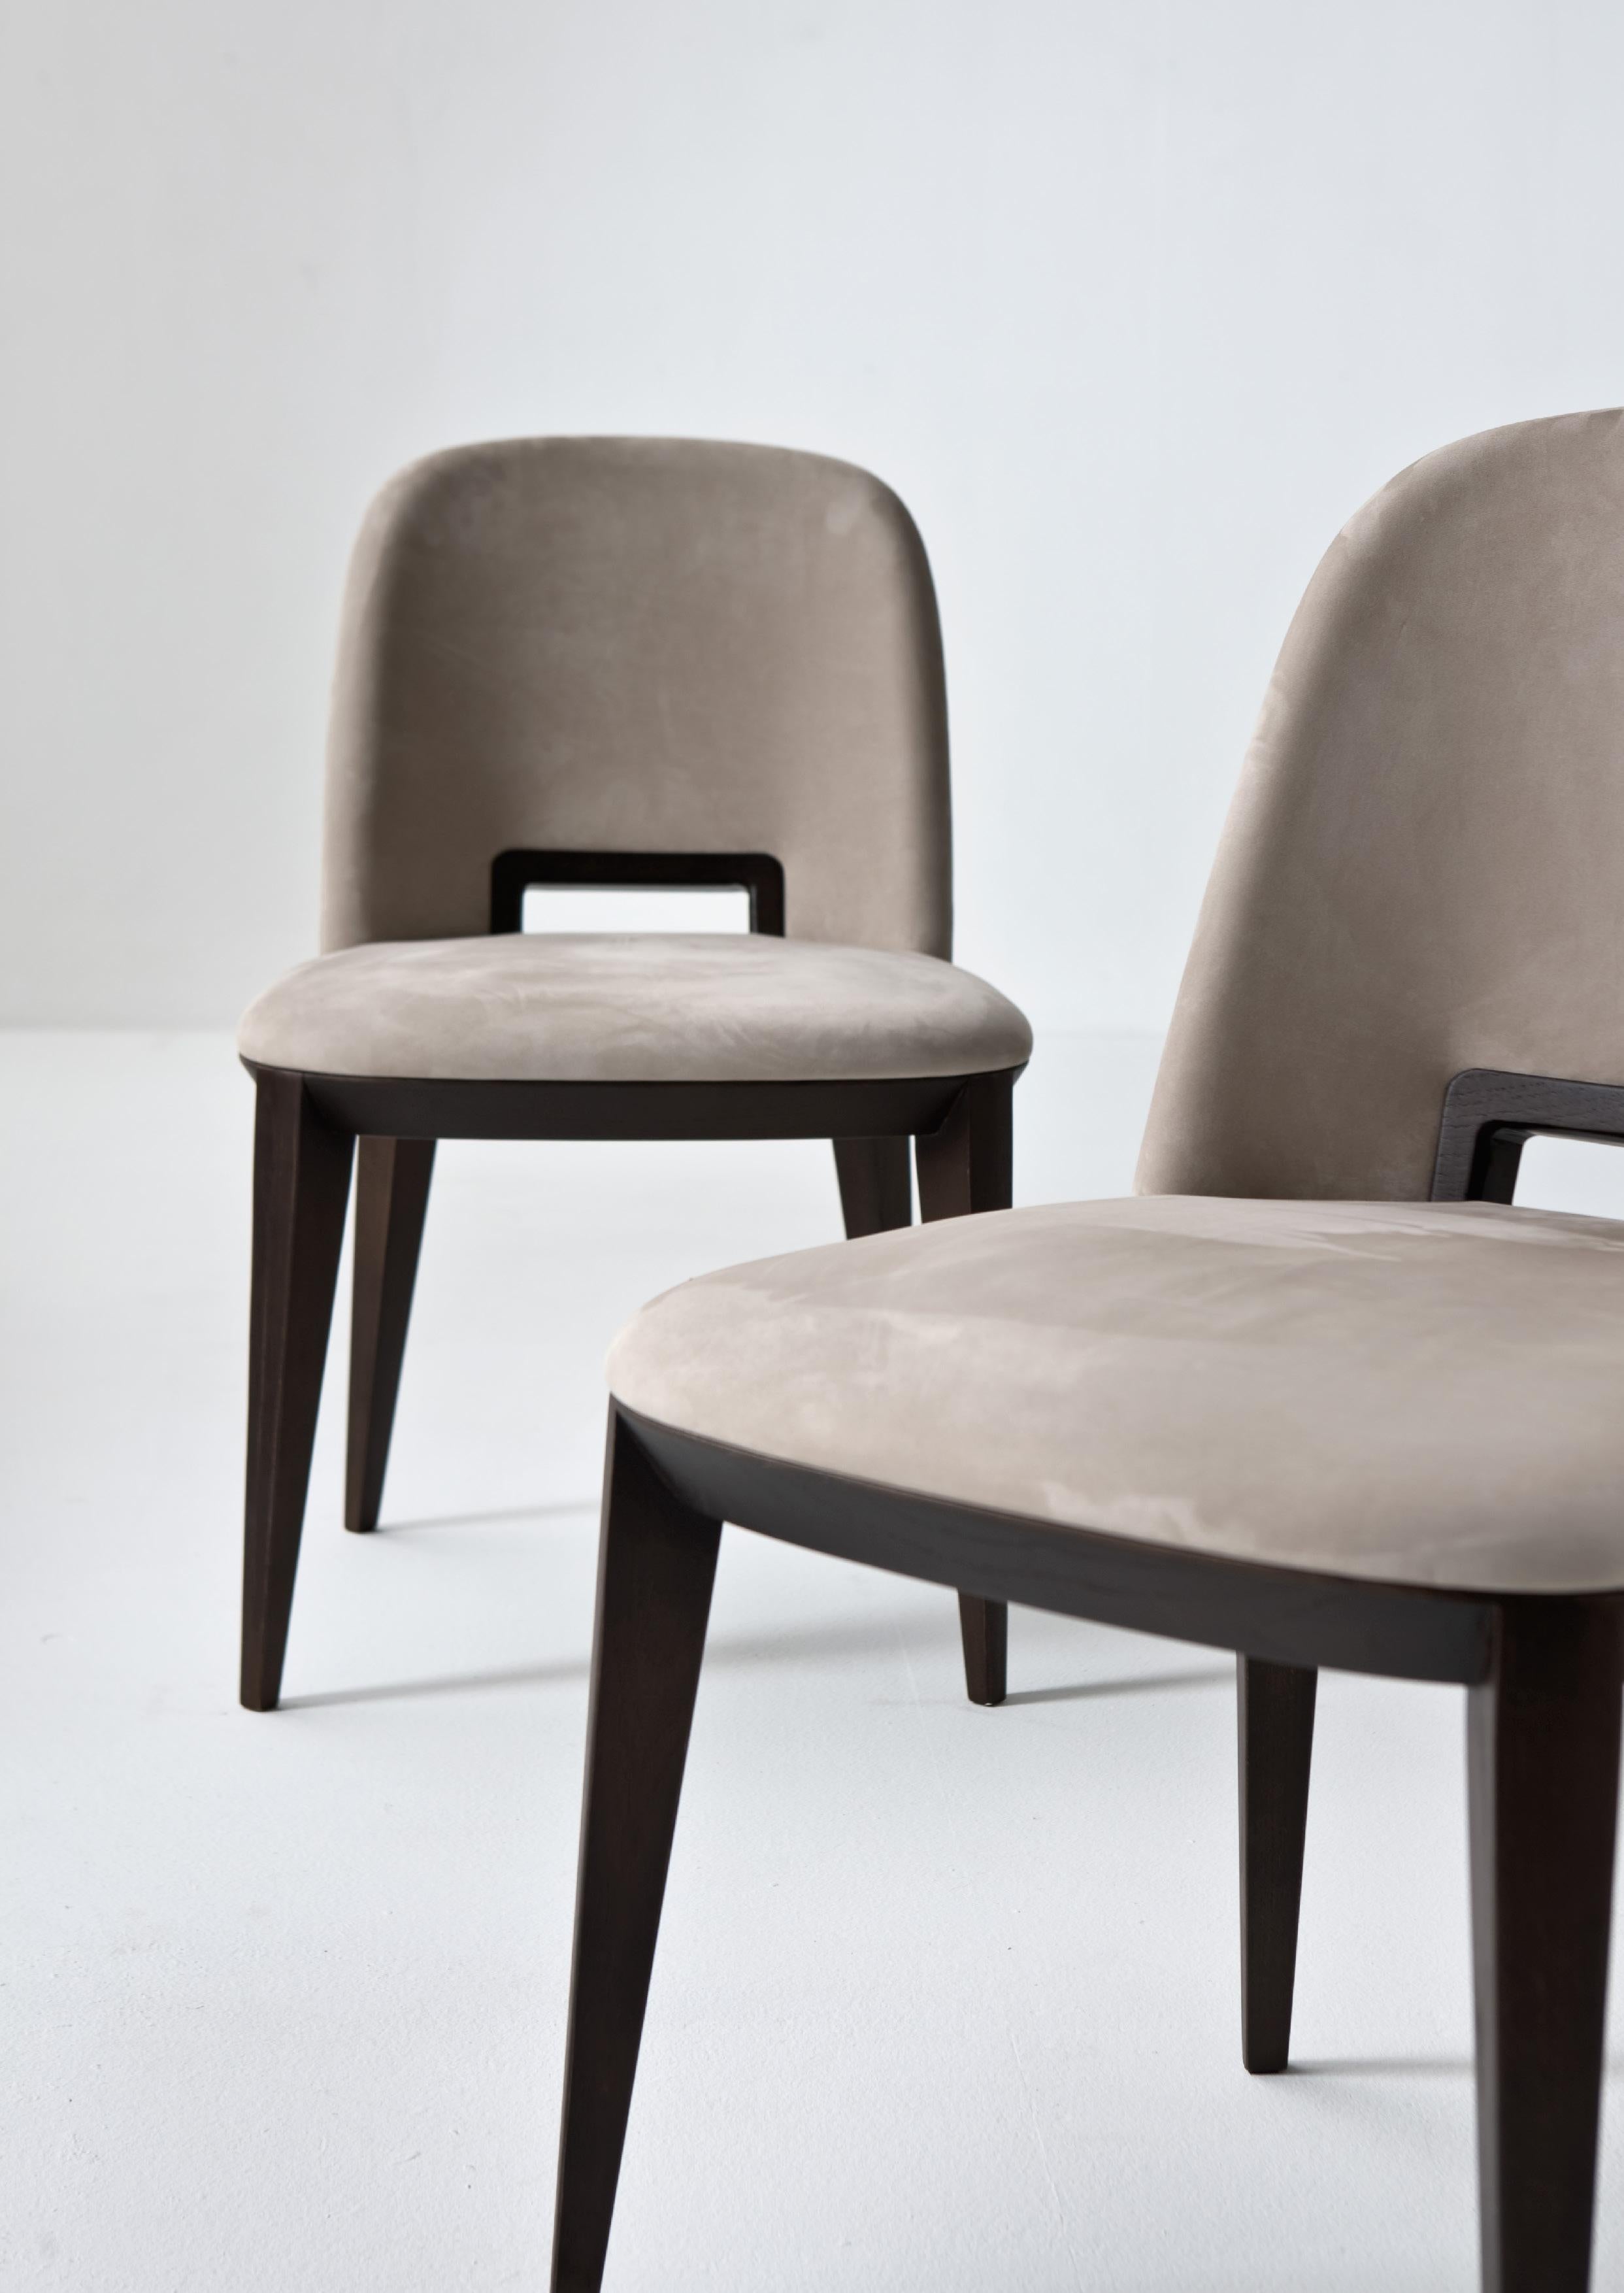 Padded chair with structure in wood painted wenge. Seat and back with polyurethane foam padding covered in Cat. A Nubuck leather.

FINISH:
Cat. A Nubuck leather 2118 and wenge-painted wood

The sinuous line, the well-proportioned legs, the